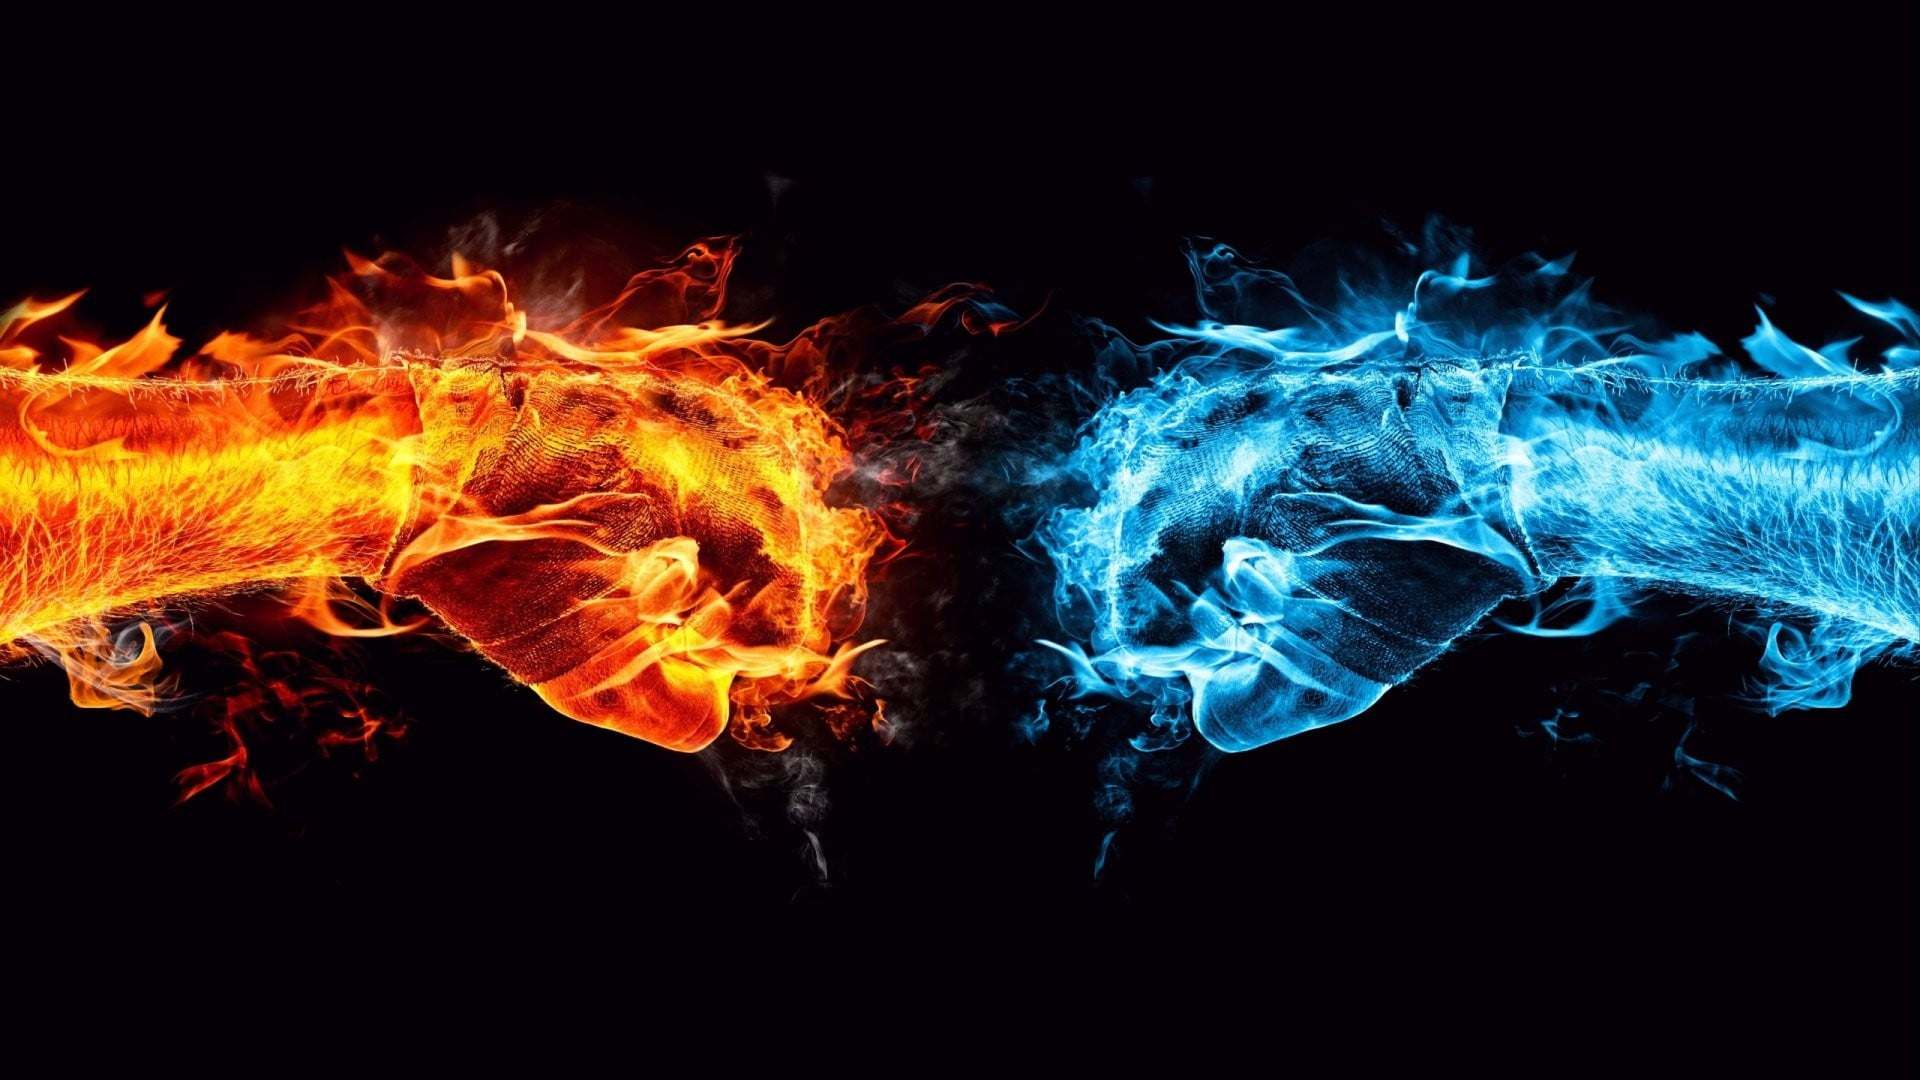 illustration of orange and blue flaming fists, fire, water, fists, hands